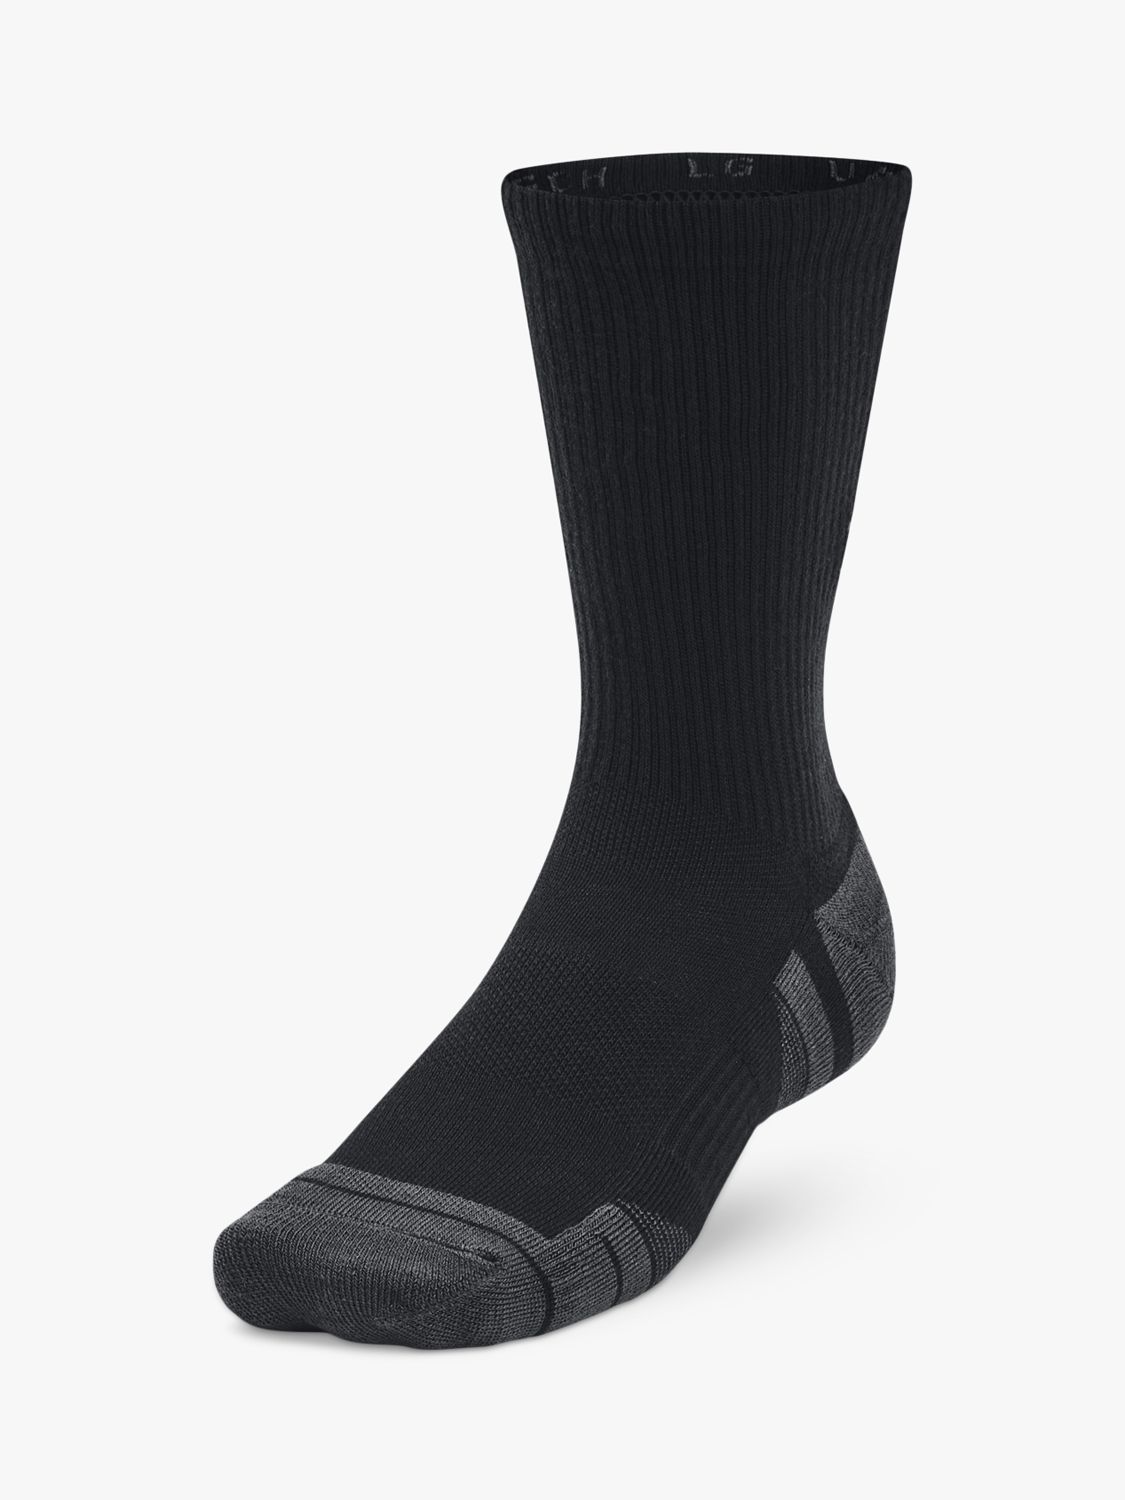 Under Armour Performance Tech Socks, Pack of 3, Mod Gray/White/Jet Gray at  John Lewis & Partners